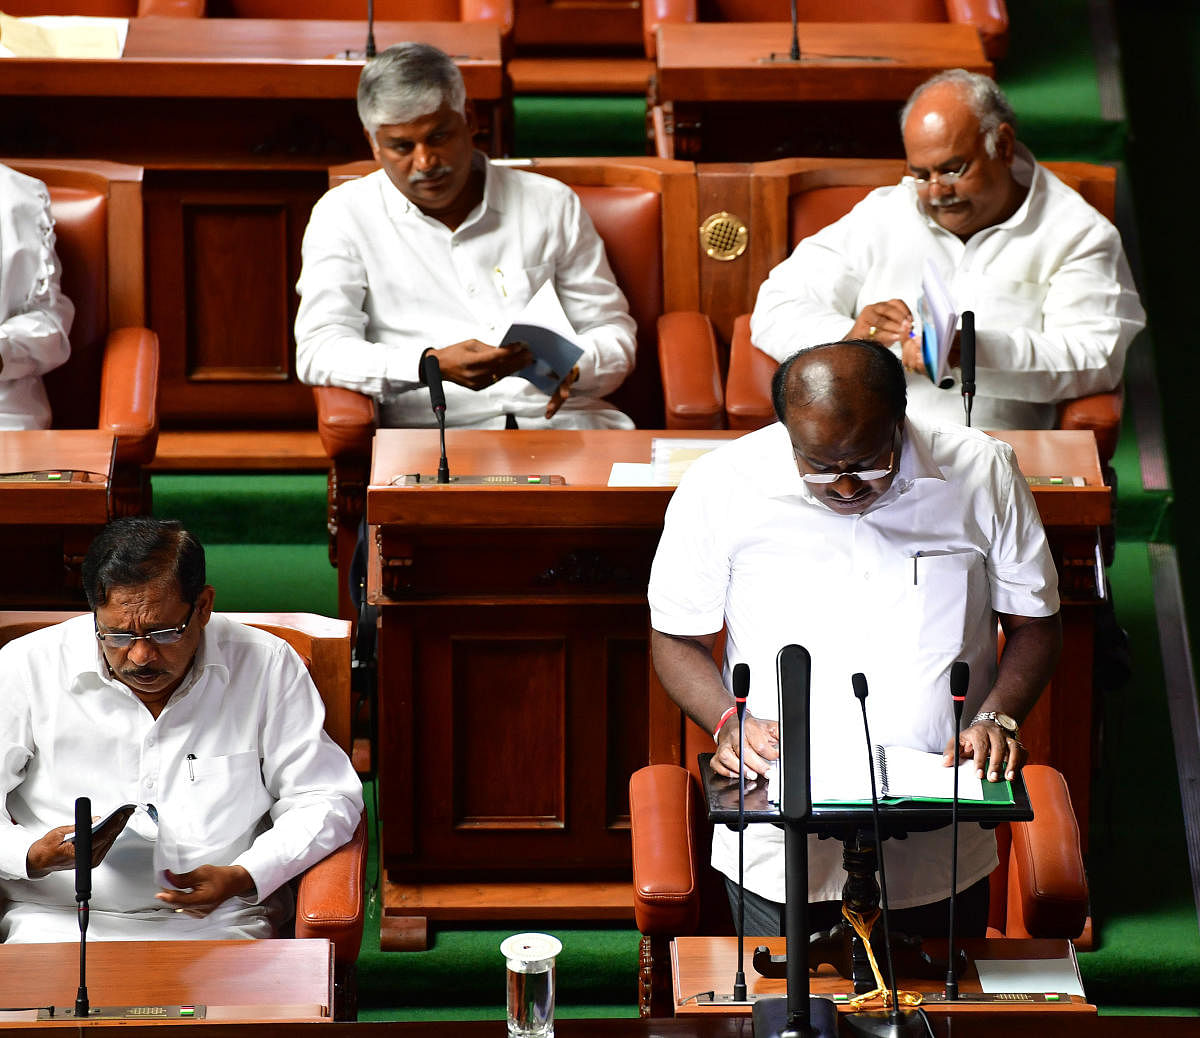 Chief Minister H D Kumaraswamy, who also holds the Finance portfolio, will present the budget proposals for 2019-2020 on February 8. Both Houses will conduct business till February 15, according to an official notification issued on Friday.